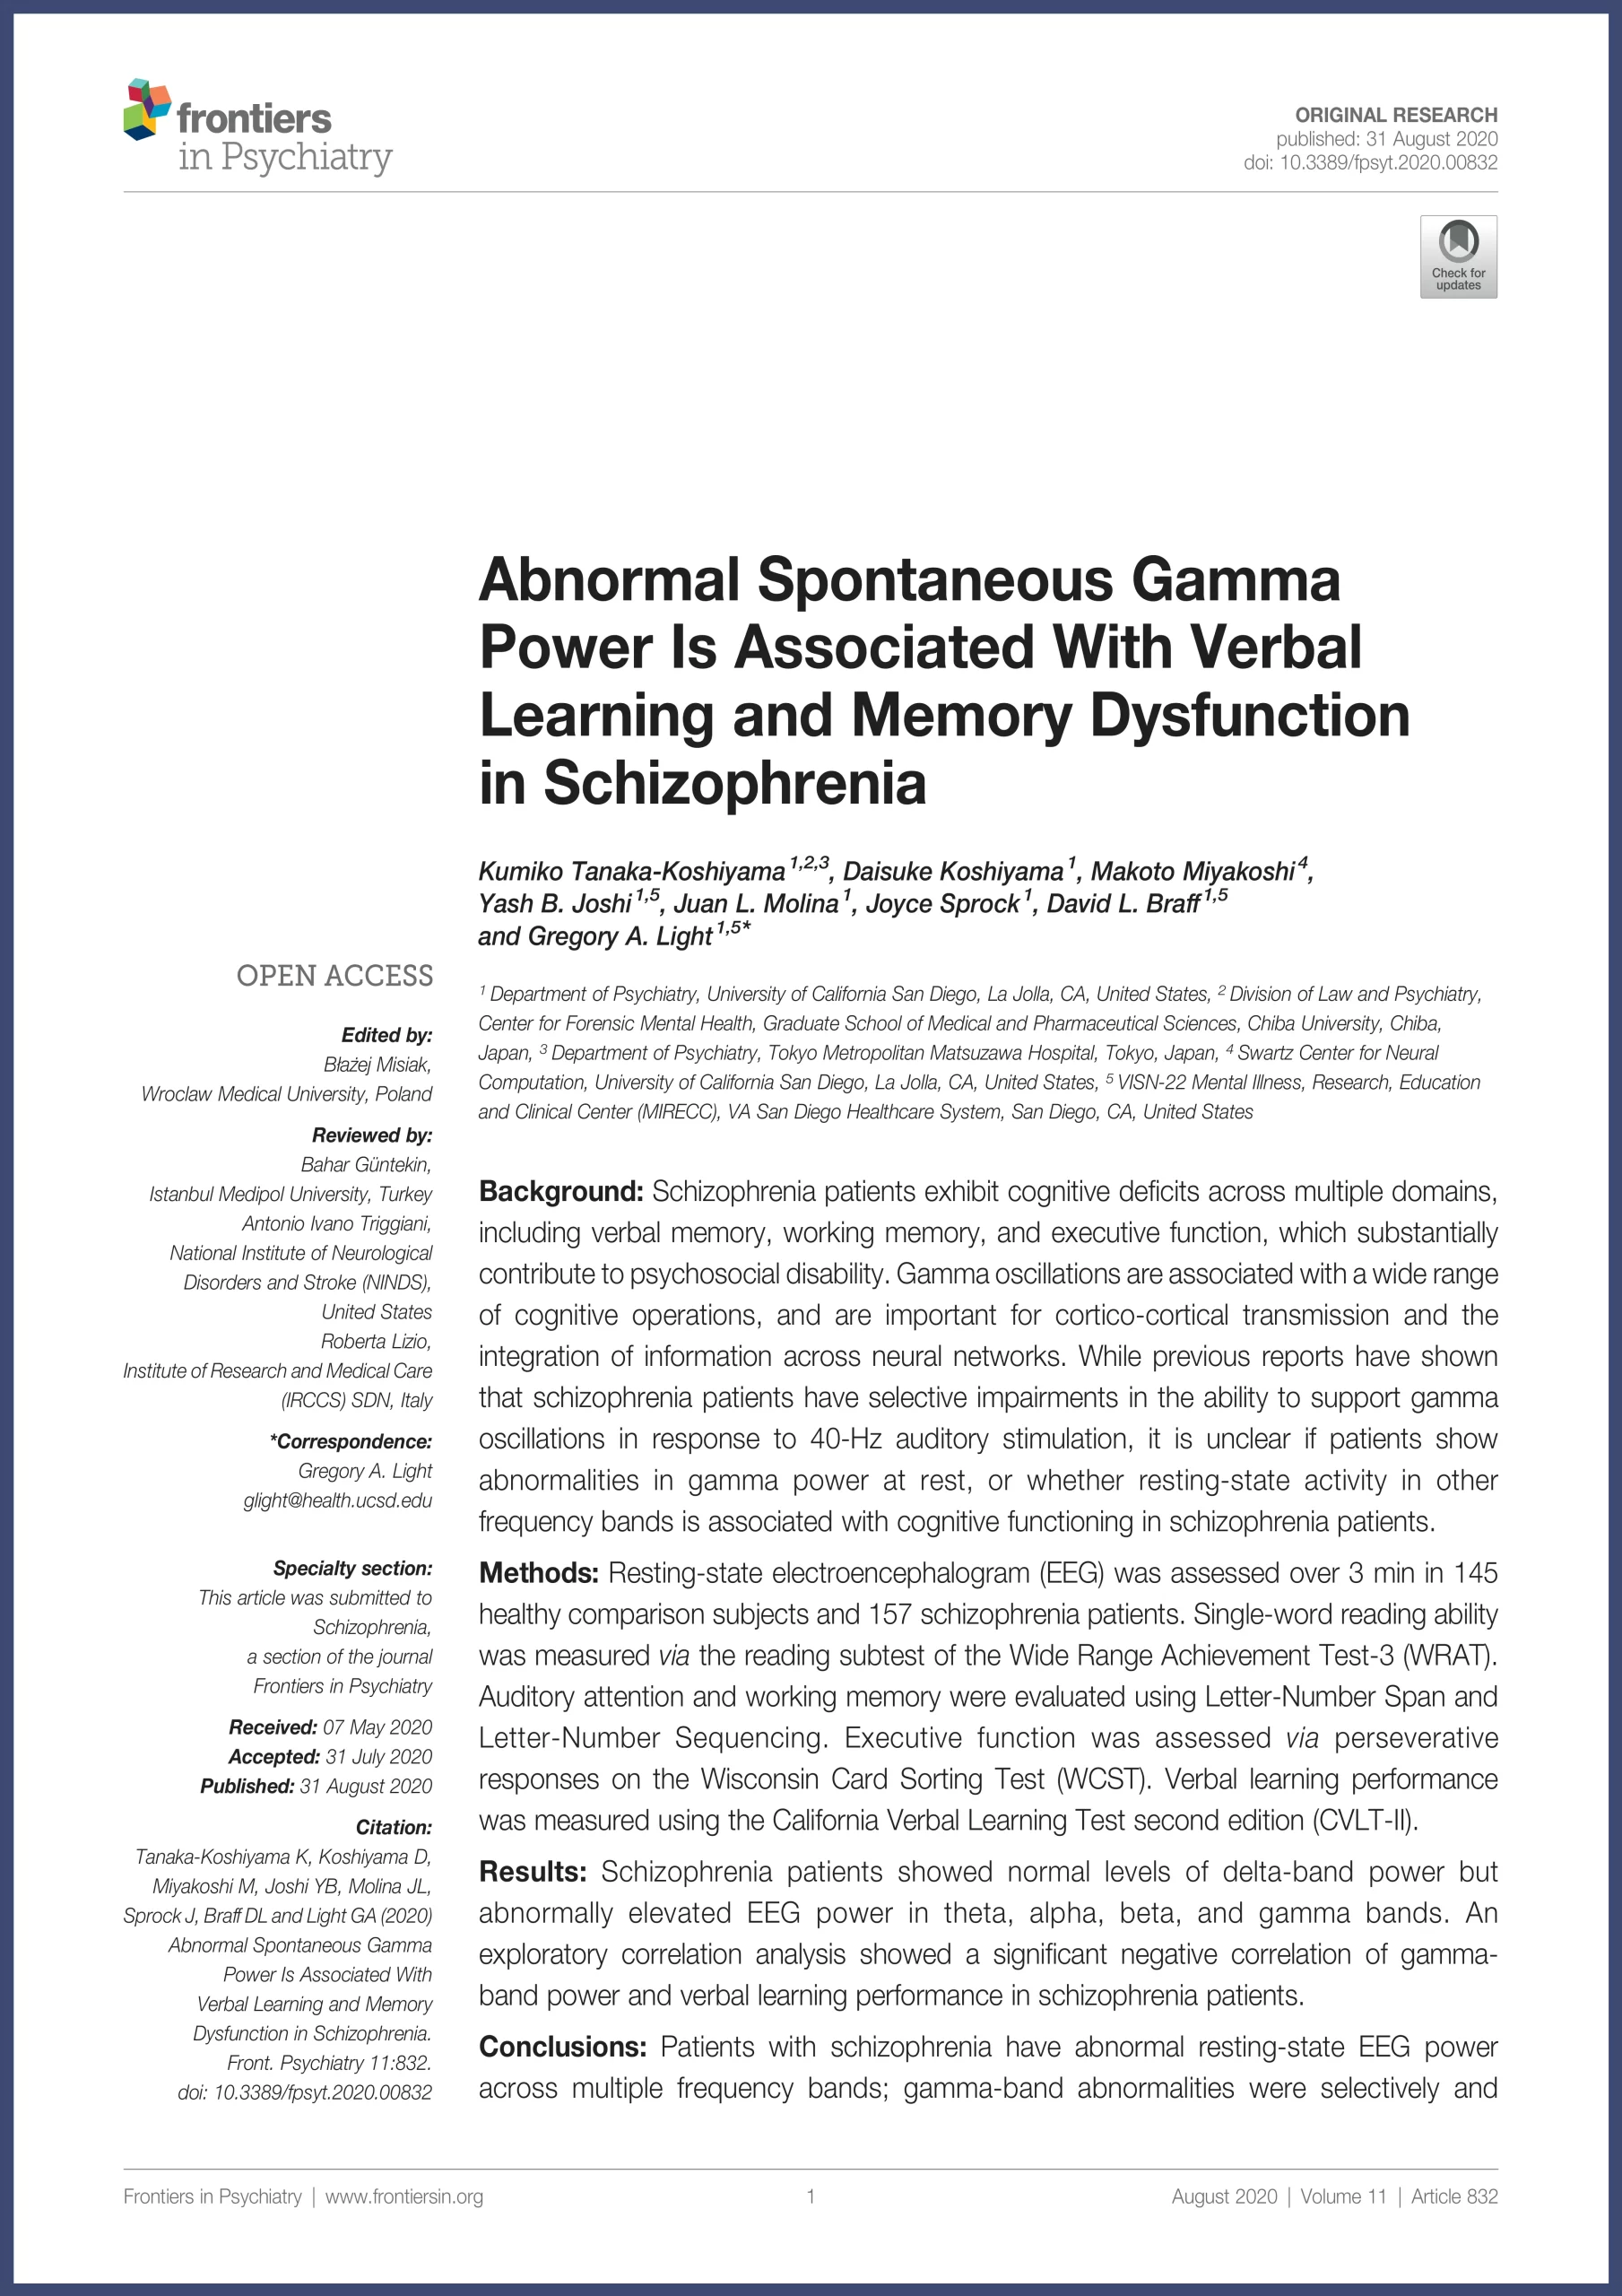 Abnormal Spontaneous Gamma Power Is Associated With Verbal Learning and Memory Dysfunction in Schizophrenia publication by Koshiyama 2020